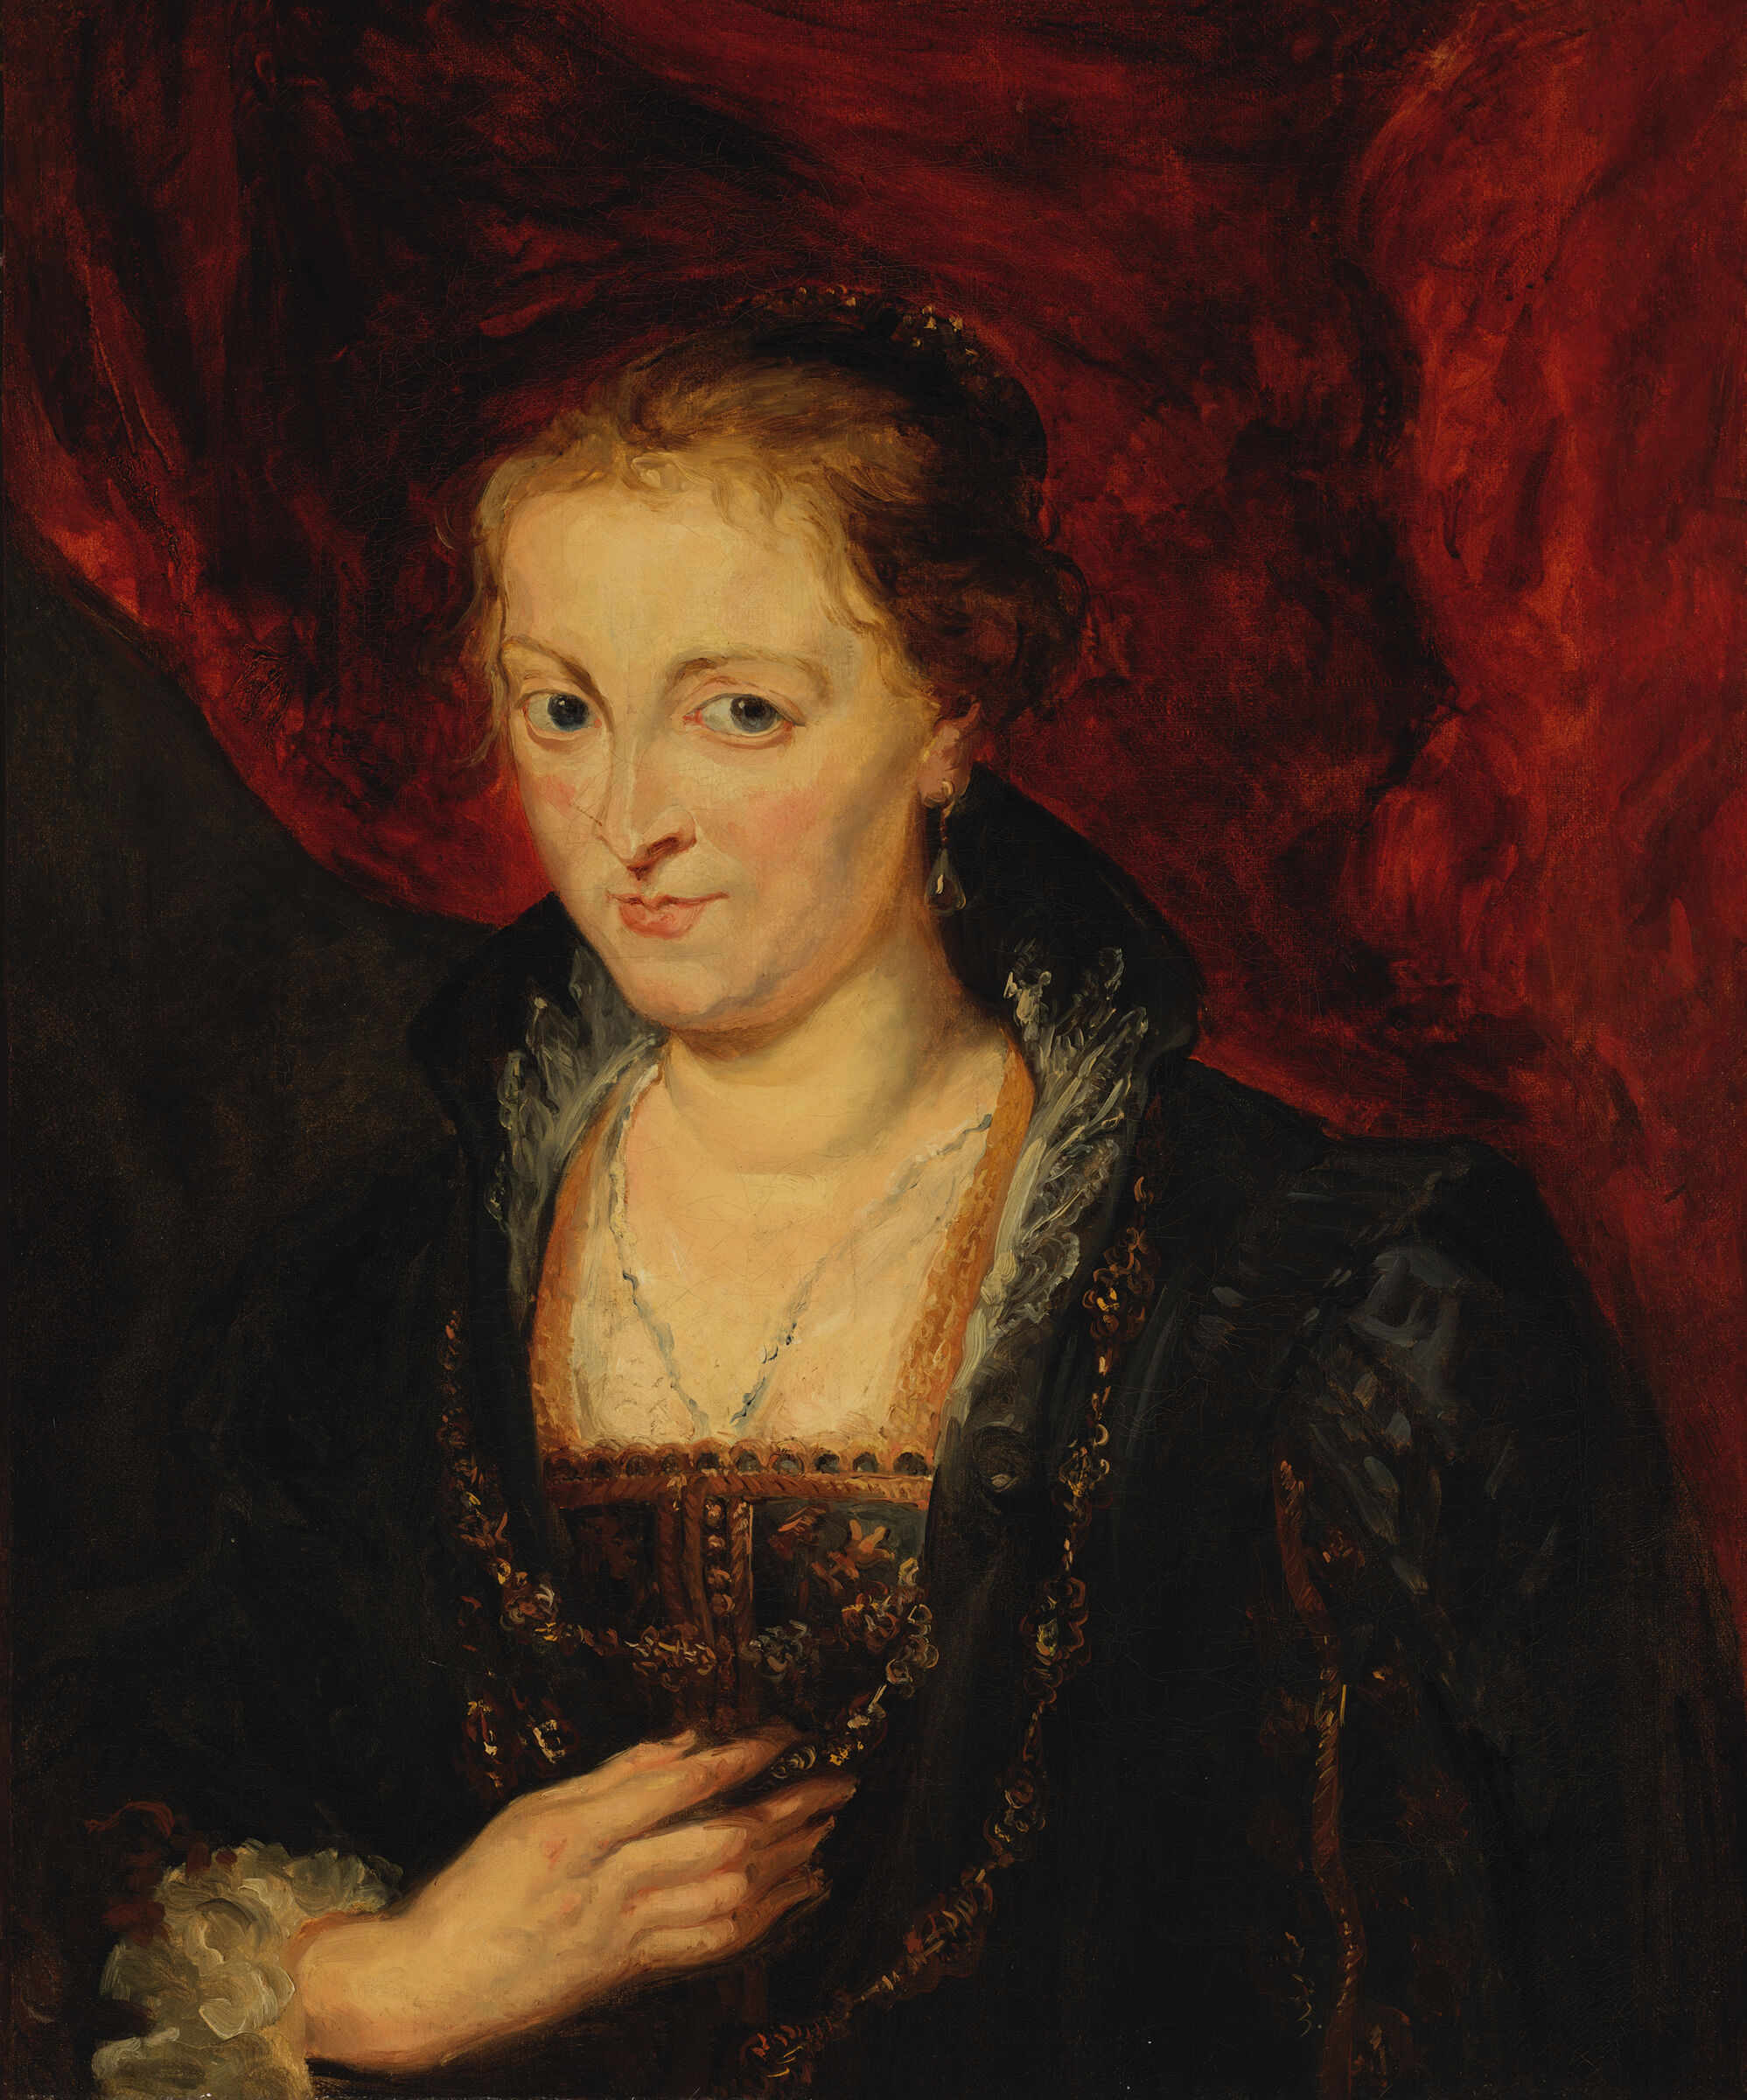 Suzanne Fourment, After Rubens